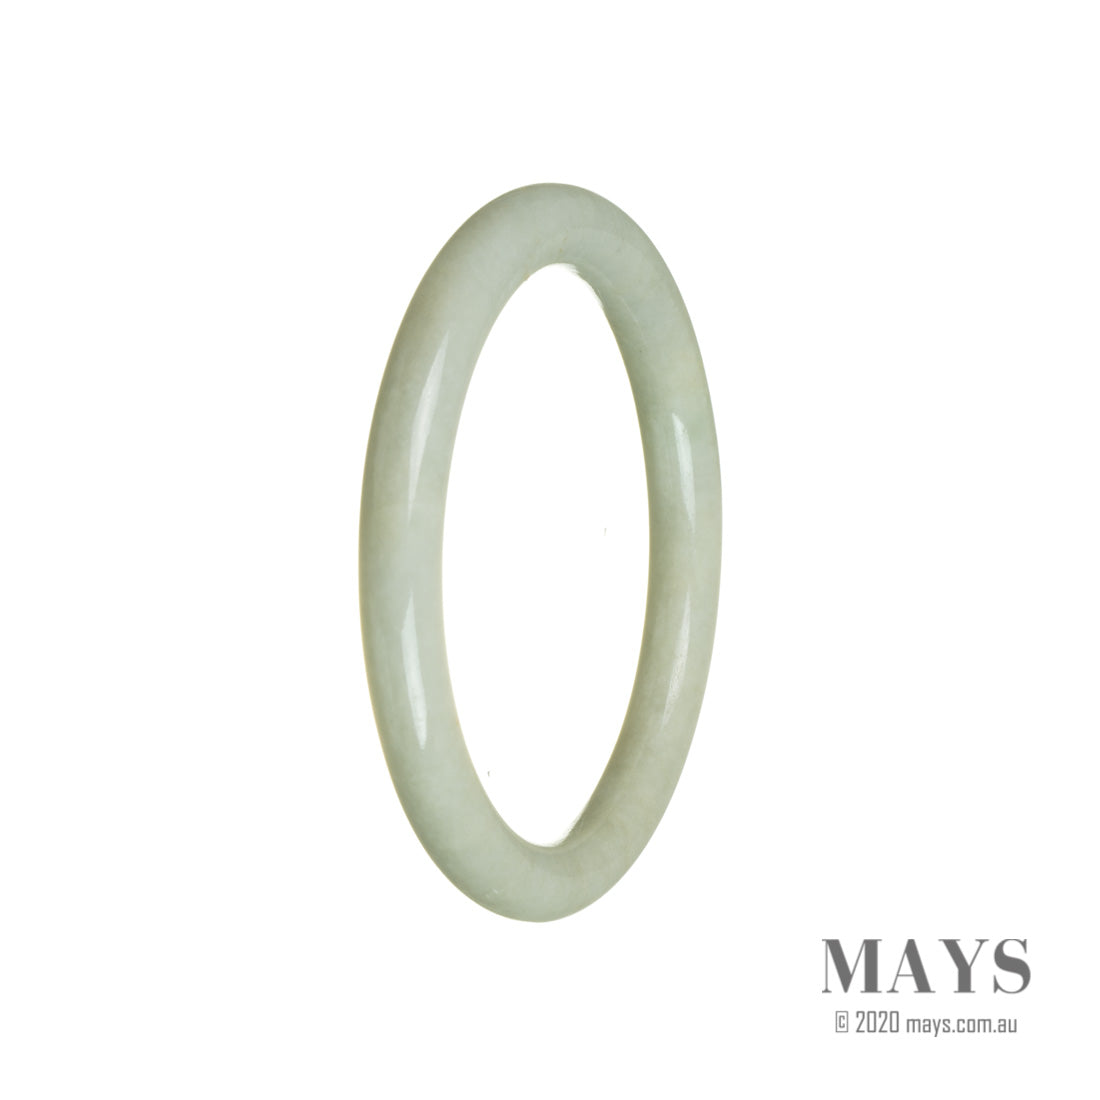 A beautiful pale green jade bangle bracelet with an oval shape. Perfect for adding a touch of elegance to any outfit.